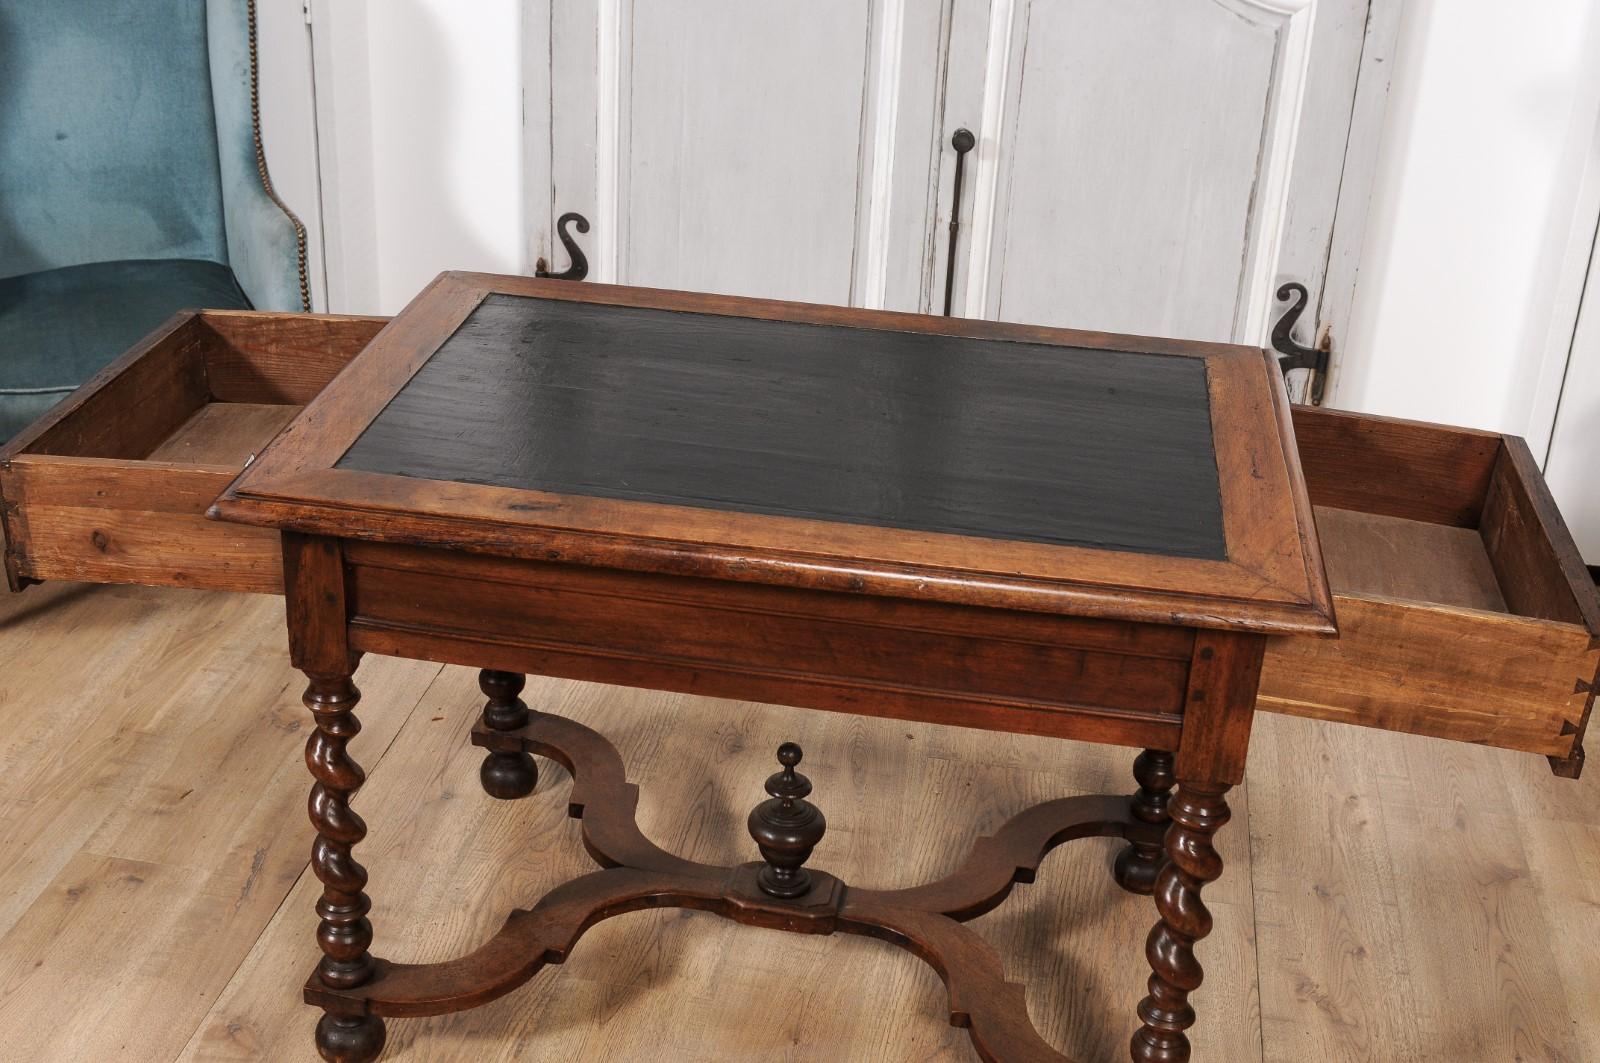 Louis XIII Period 1630s Carved Walnut Barley Twist Table with Black Painted Top For Sale 6